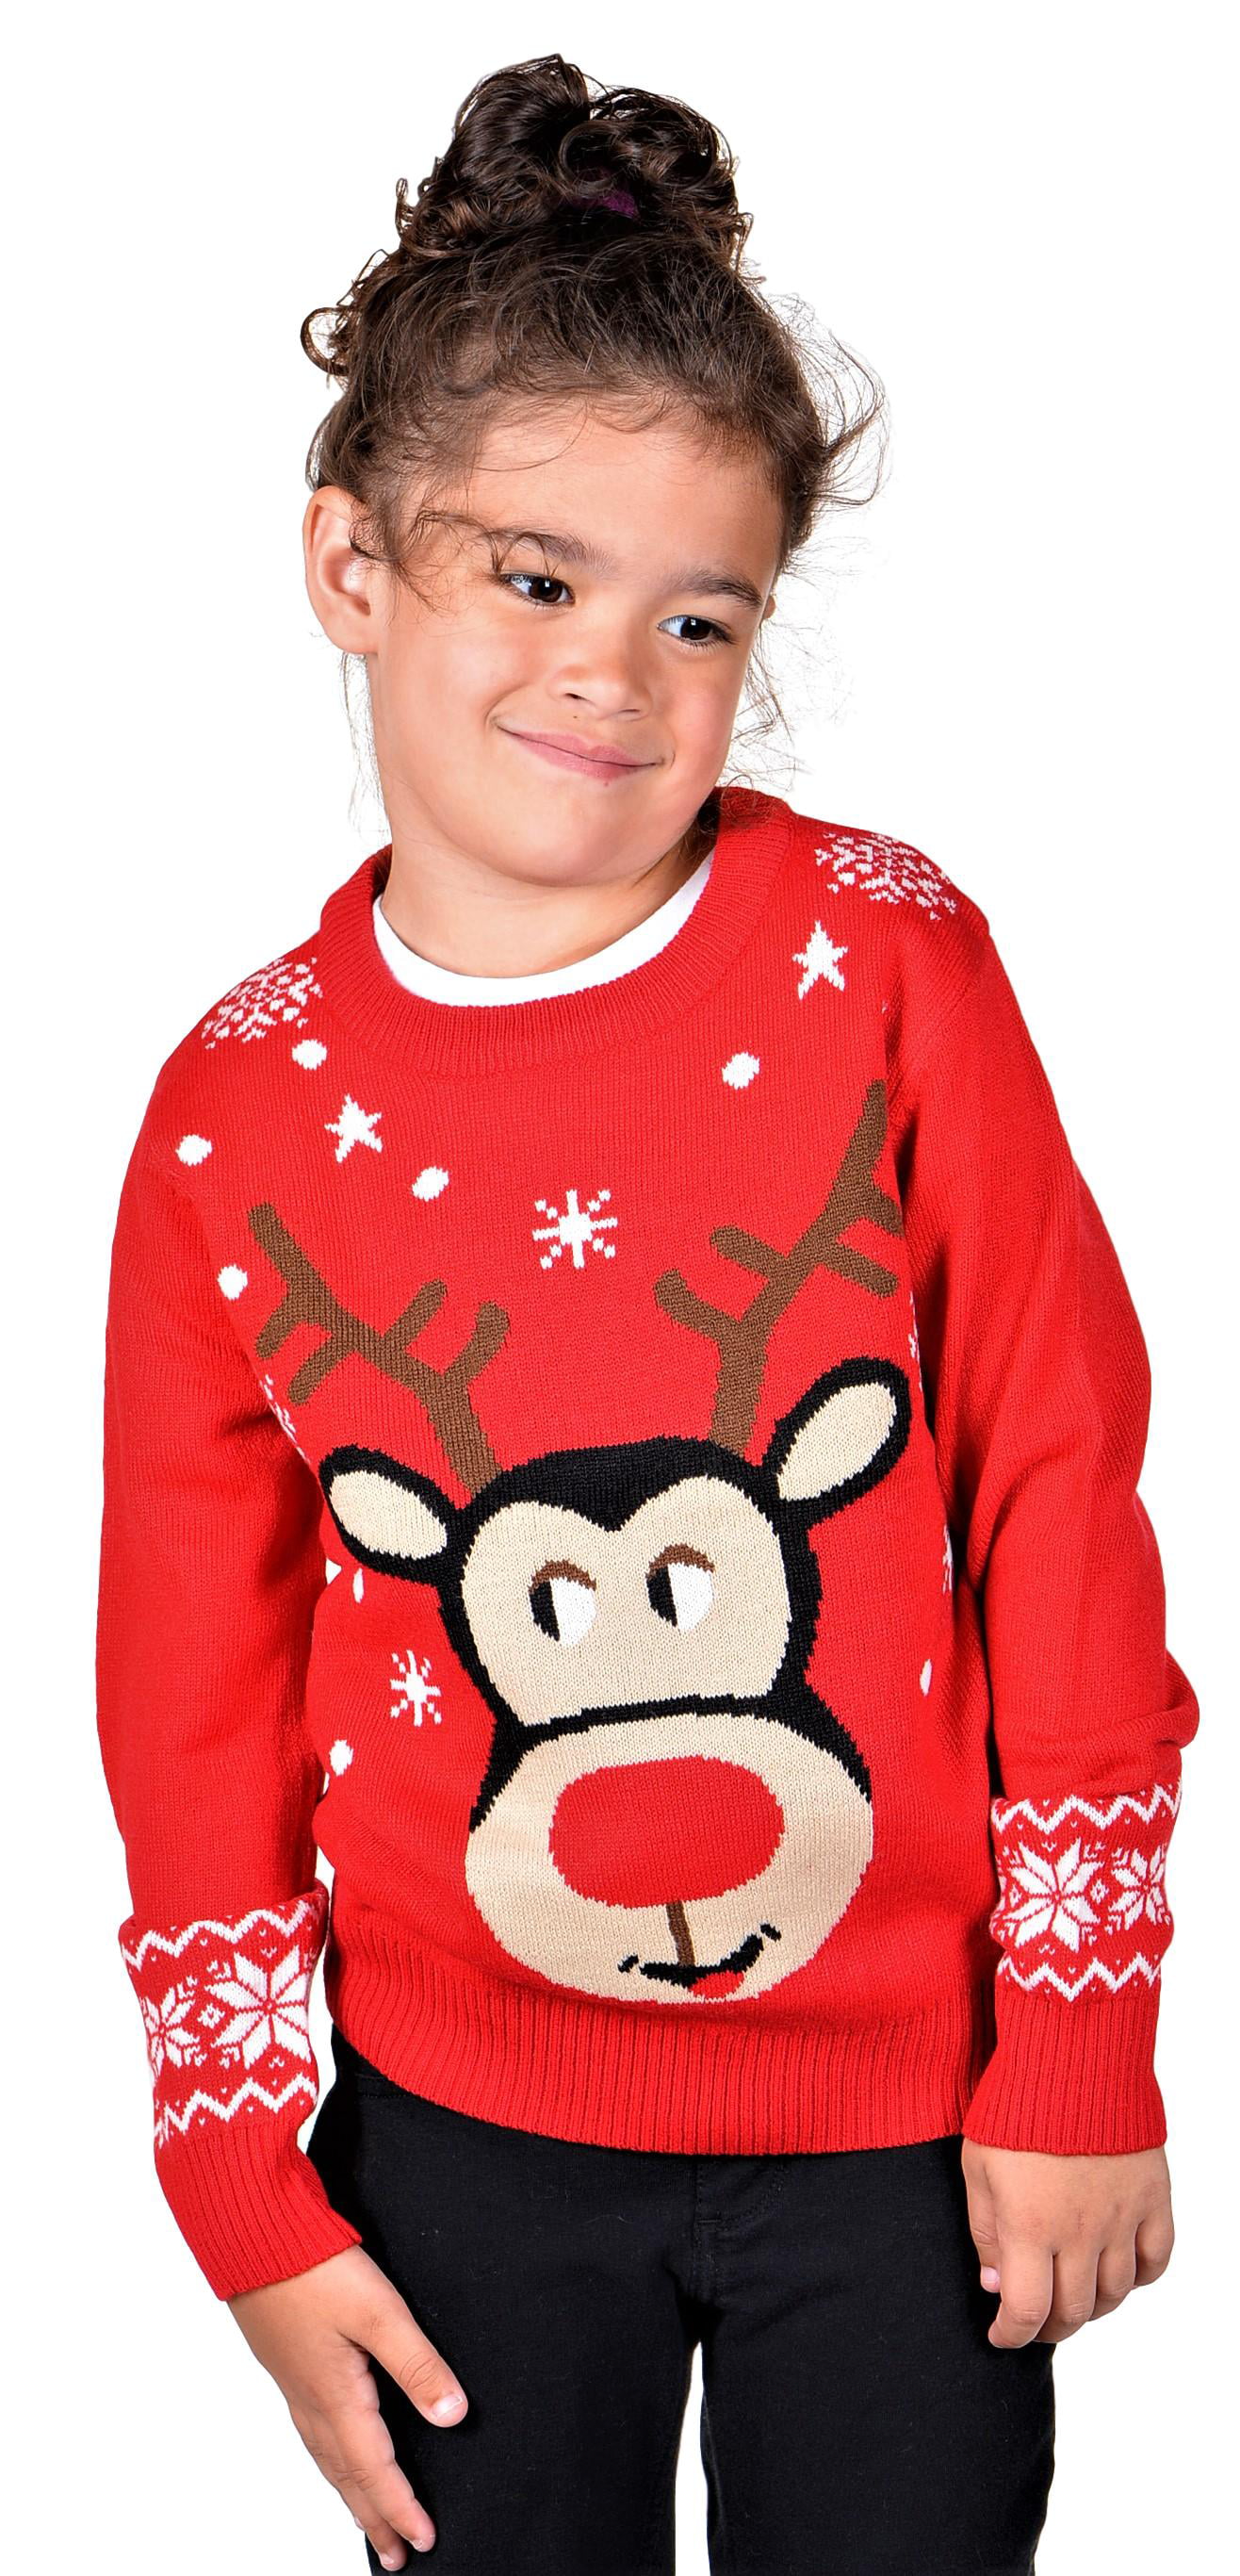 KESIS Children Ugly Christmas Sweater Red 